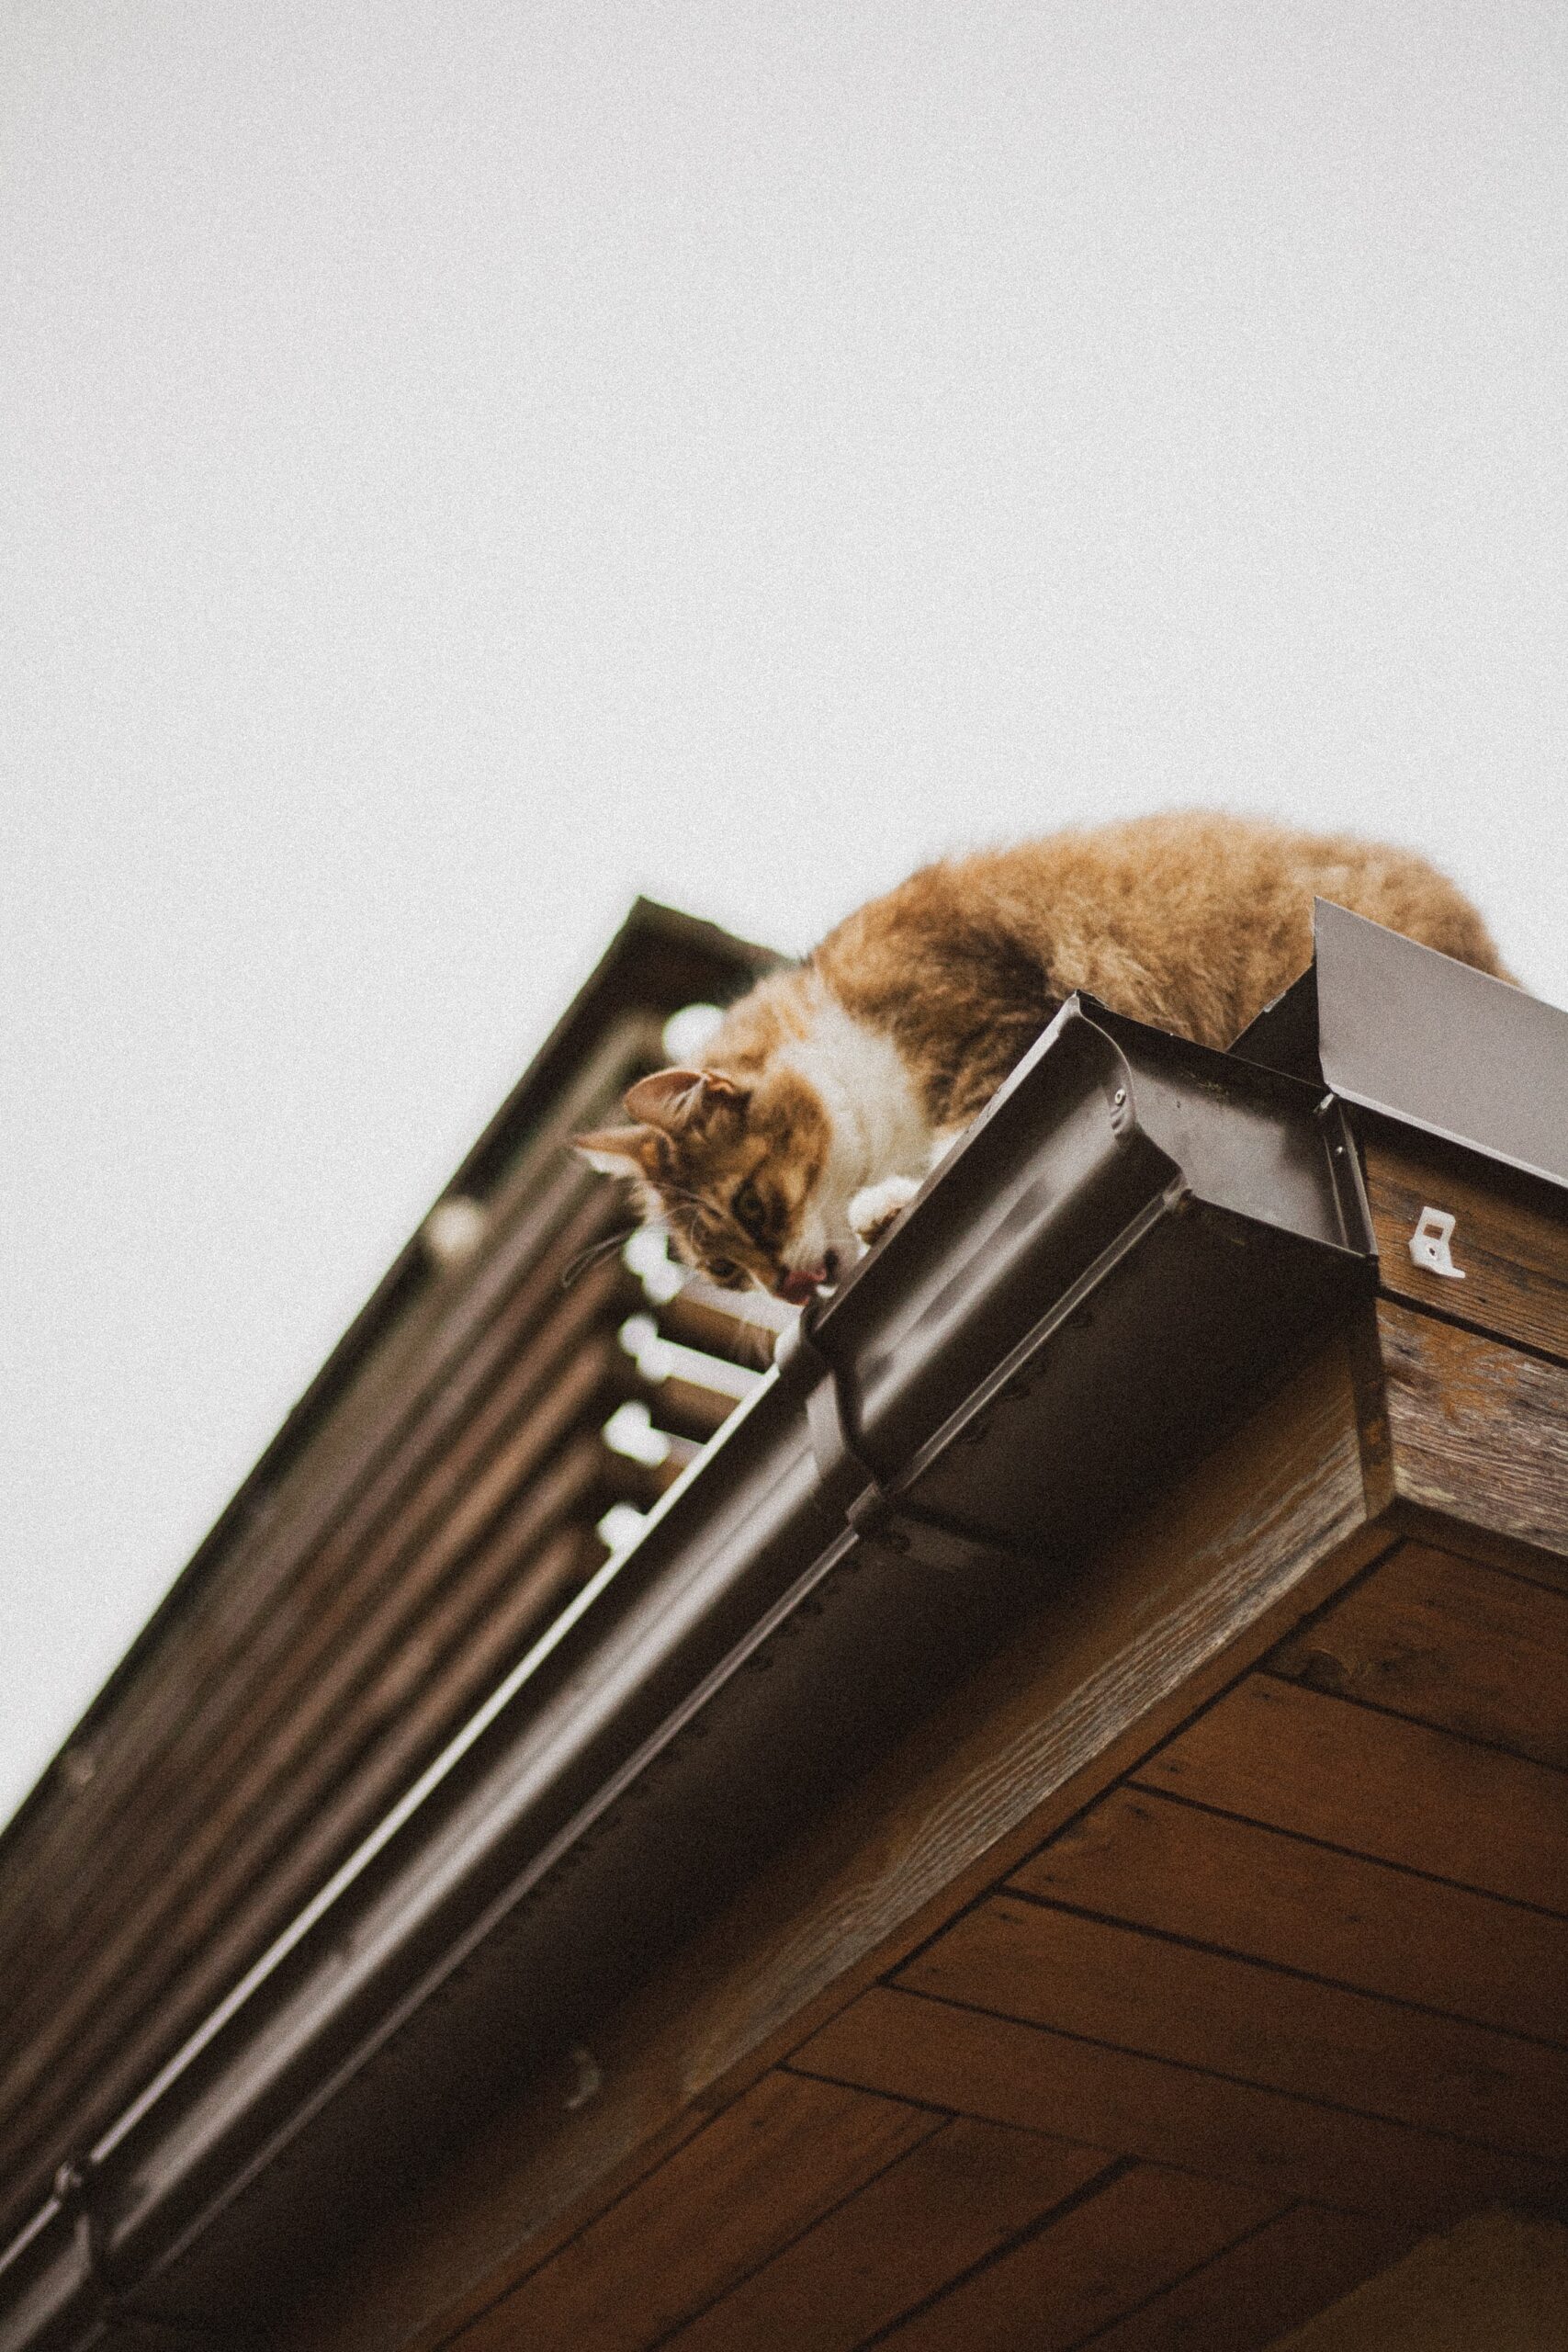 Cat looking into a gutter on a roof